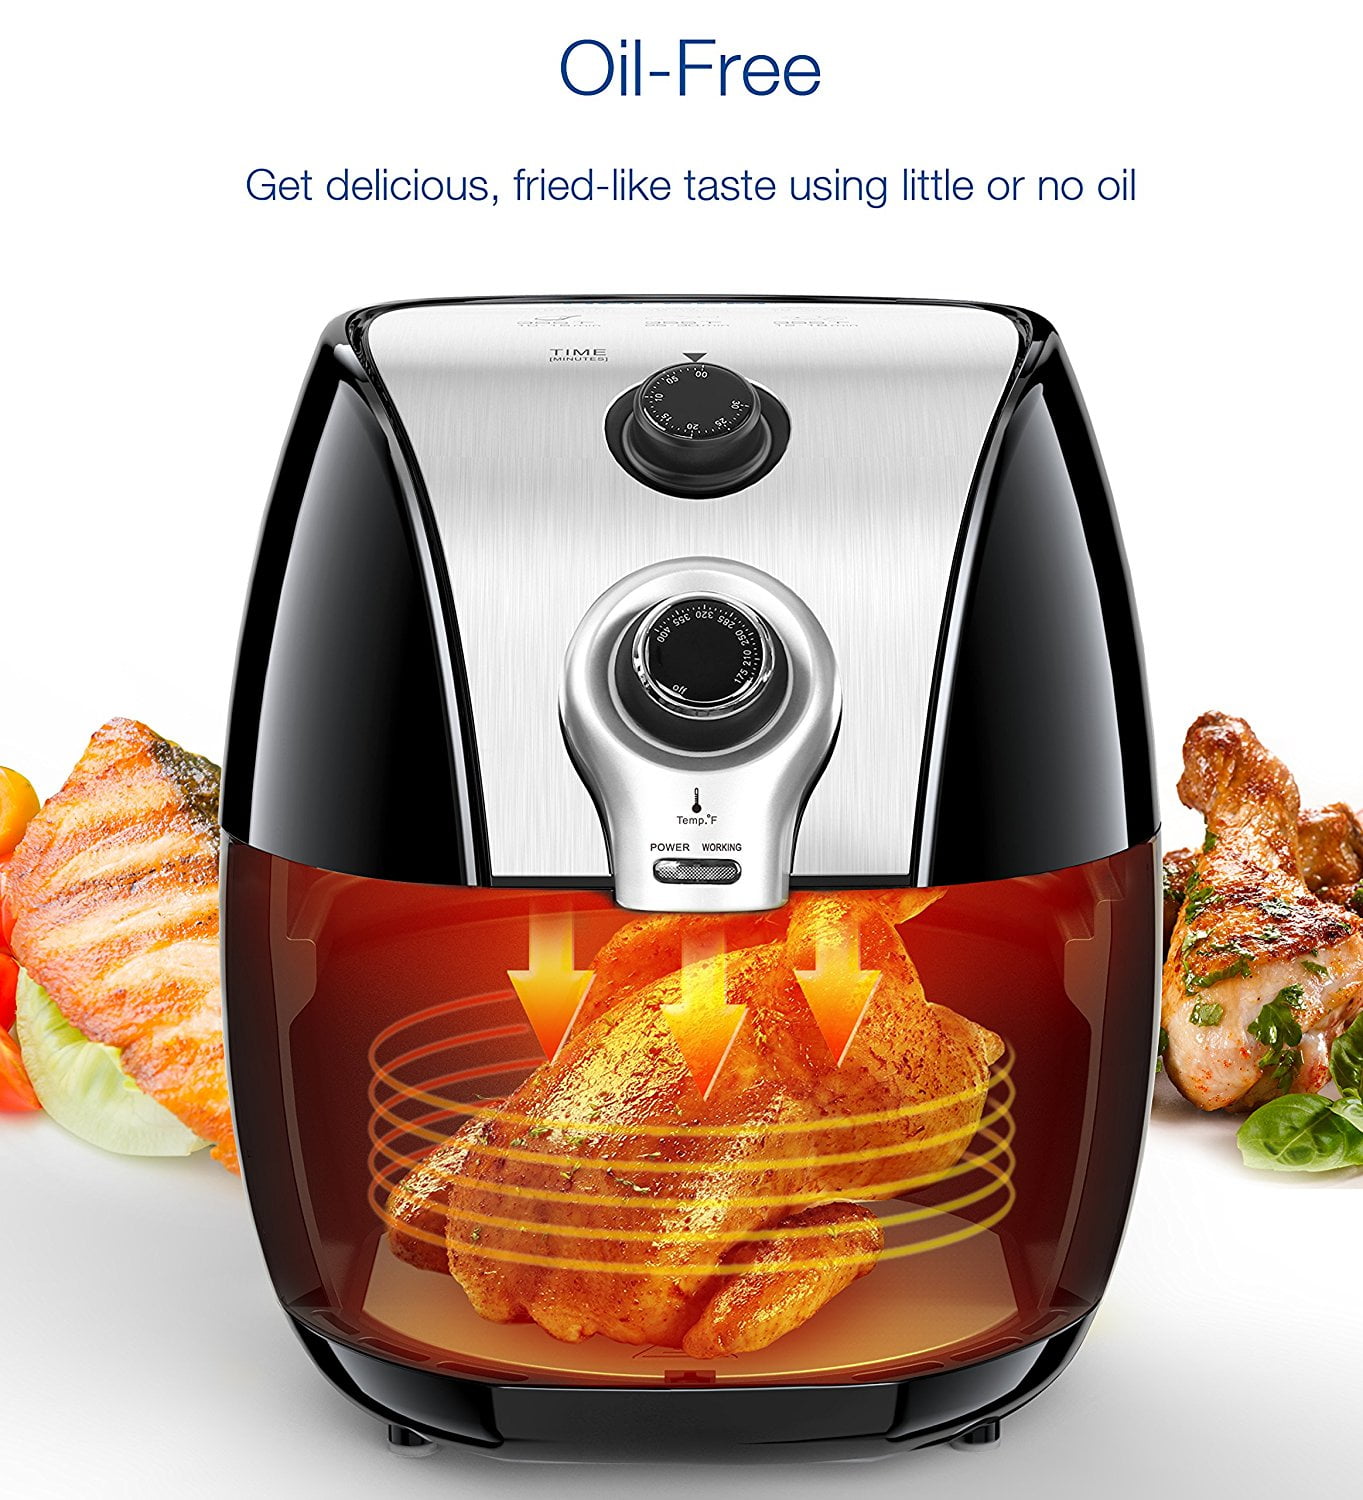 HOLSEM Digital Air Fryer with Rapid Air Circulation System 3.4 QT Capacity with LED Display Black/Stainless Steel